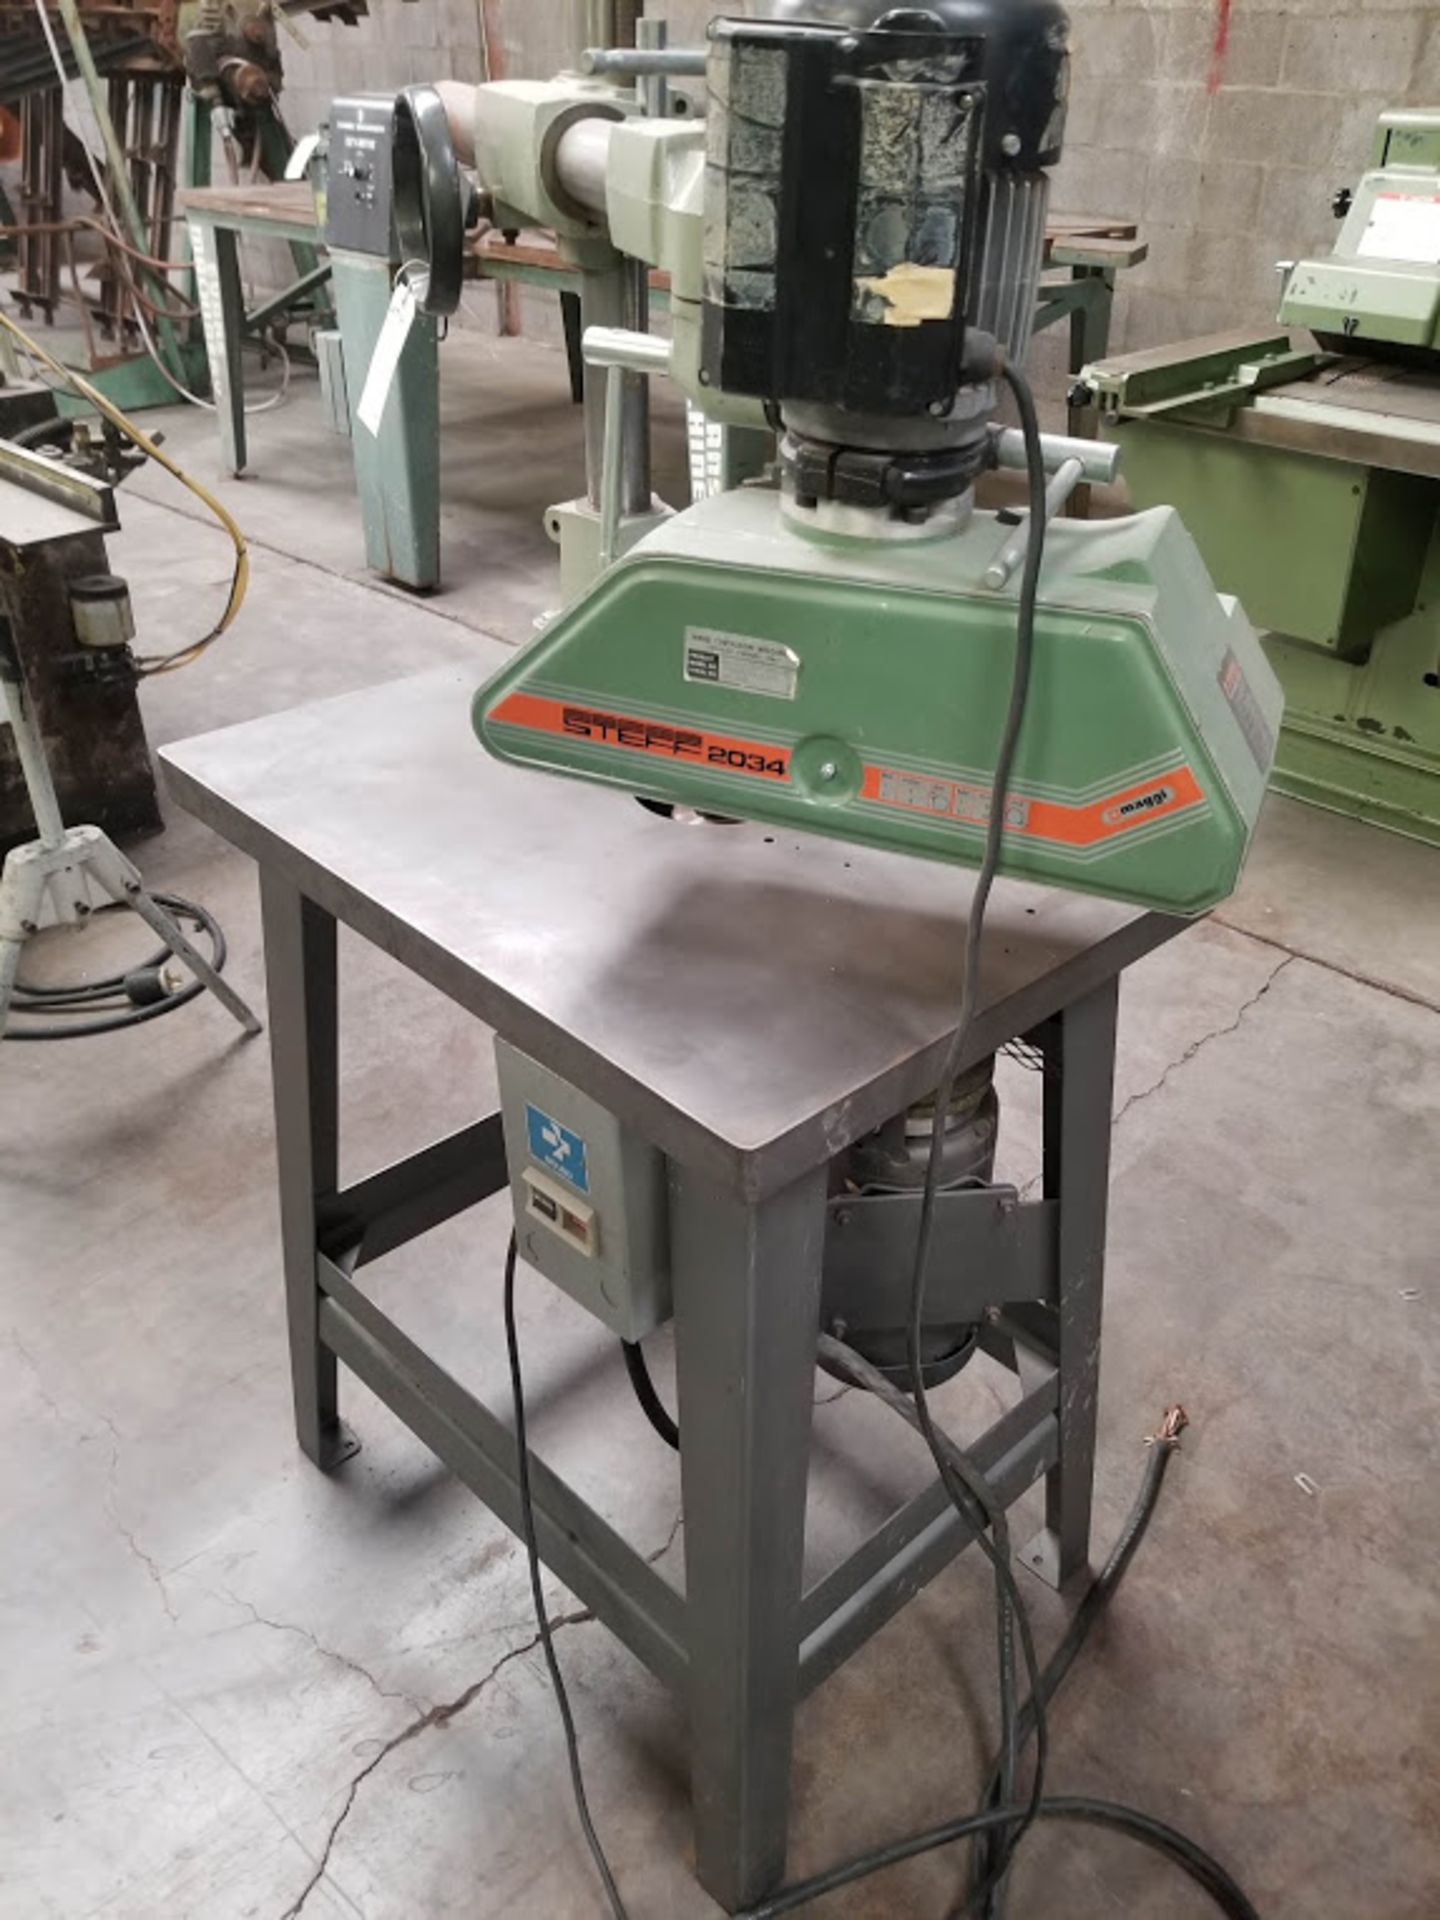 Weaver Wood Shaper, 3/4" Spindle, 3 HP 208-230/460 volt 3 phase Motor & Maggi Powerfeeder, Steff - Image 2 of 5